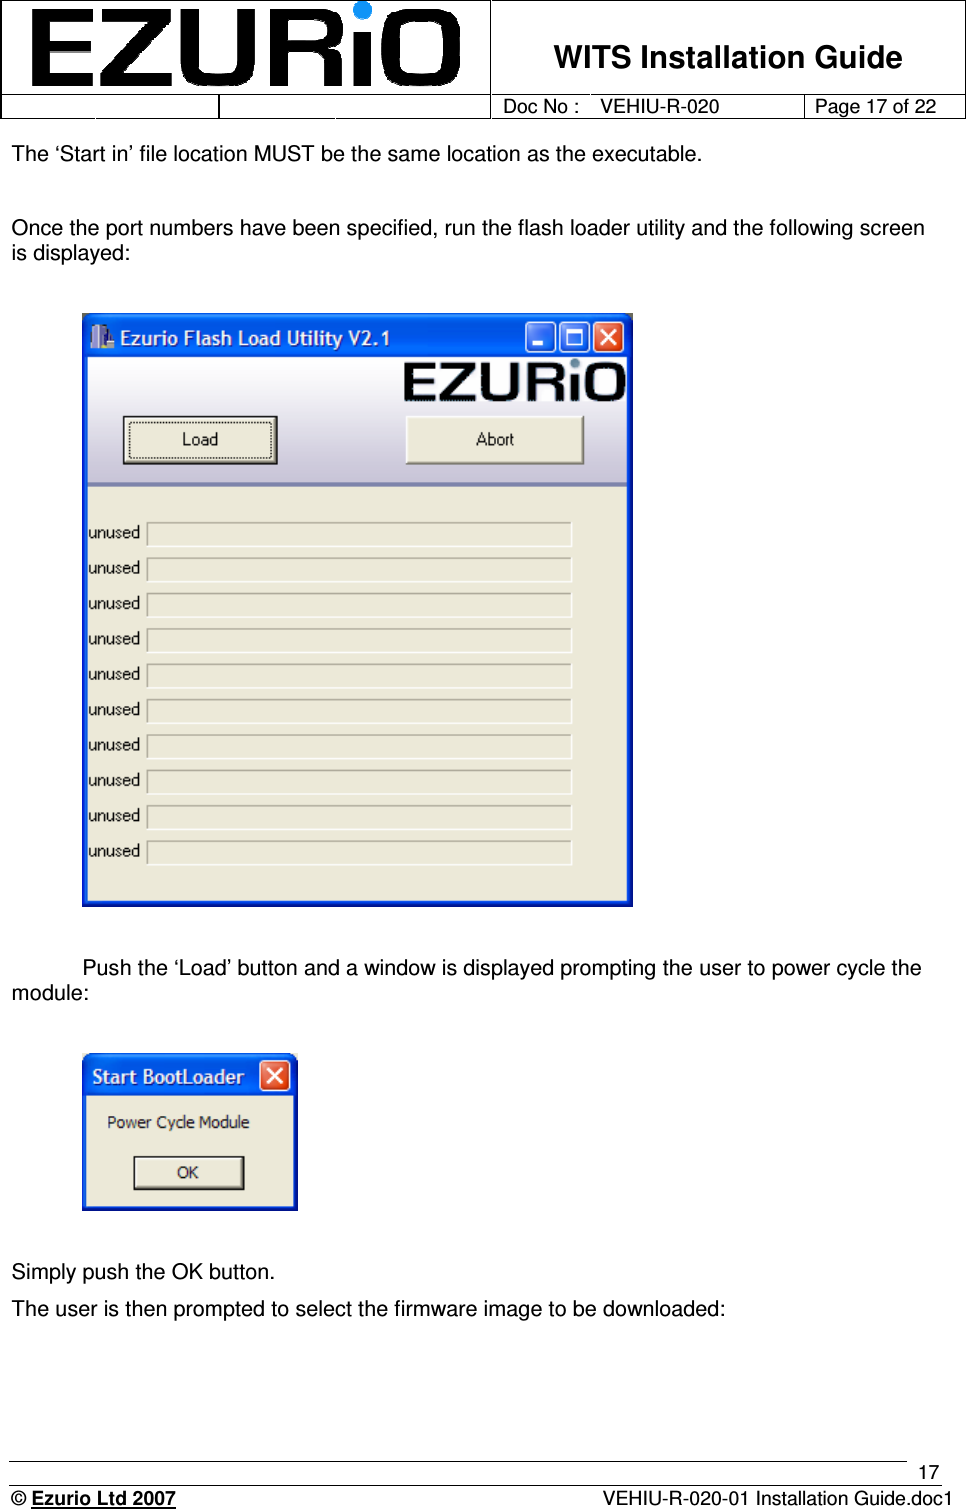    WITS Installation Guide         Doc No : VEHIU-R-020 Page 17 of 22      © Ezurio Ltd 2007  VEHIU-R-020-01 Installation Guide.doc1 17 The ‘Start in’ file location MUST be the same location as the executable.   Once the port numbers have been specified, run the flash loader utility and the following screen is displayed:     Push the ‘Load’ button and a window is displayed prompting the user to power cycle the module:    Simply push the OK button. The user is then prompted to select the firmware image to be downloaded: 